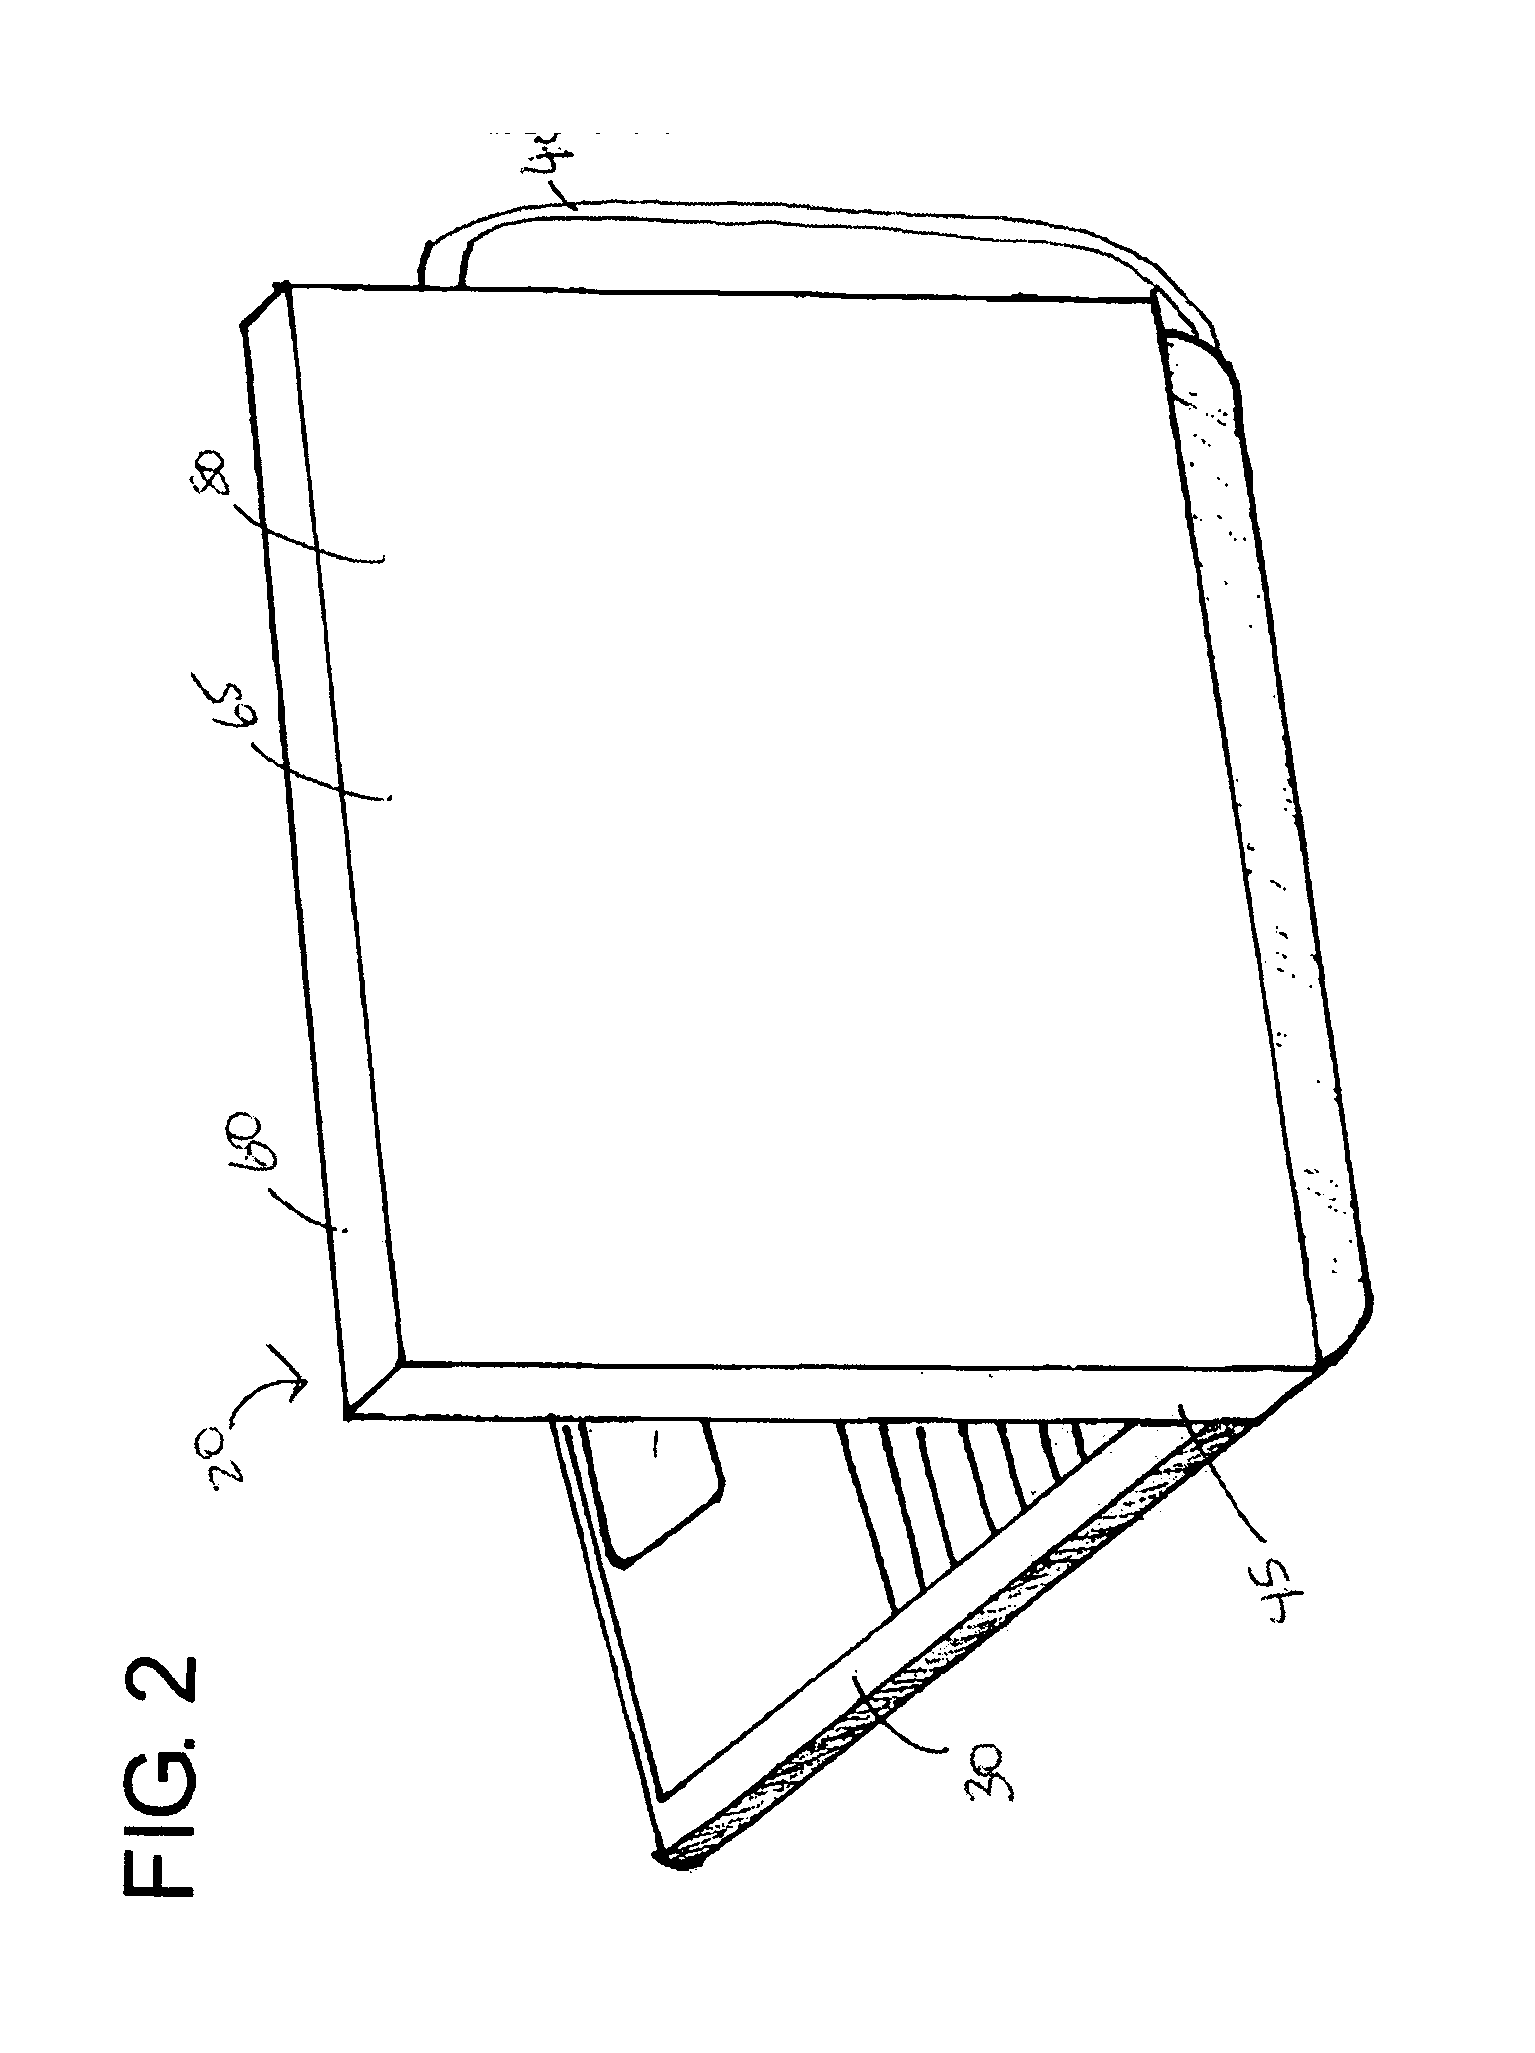 C-frame slidable touch input apparatus for displays of computing devices